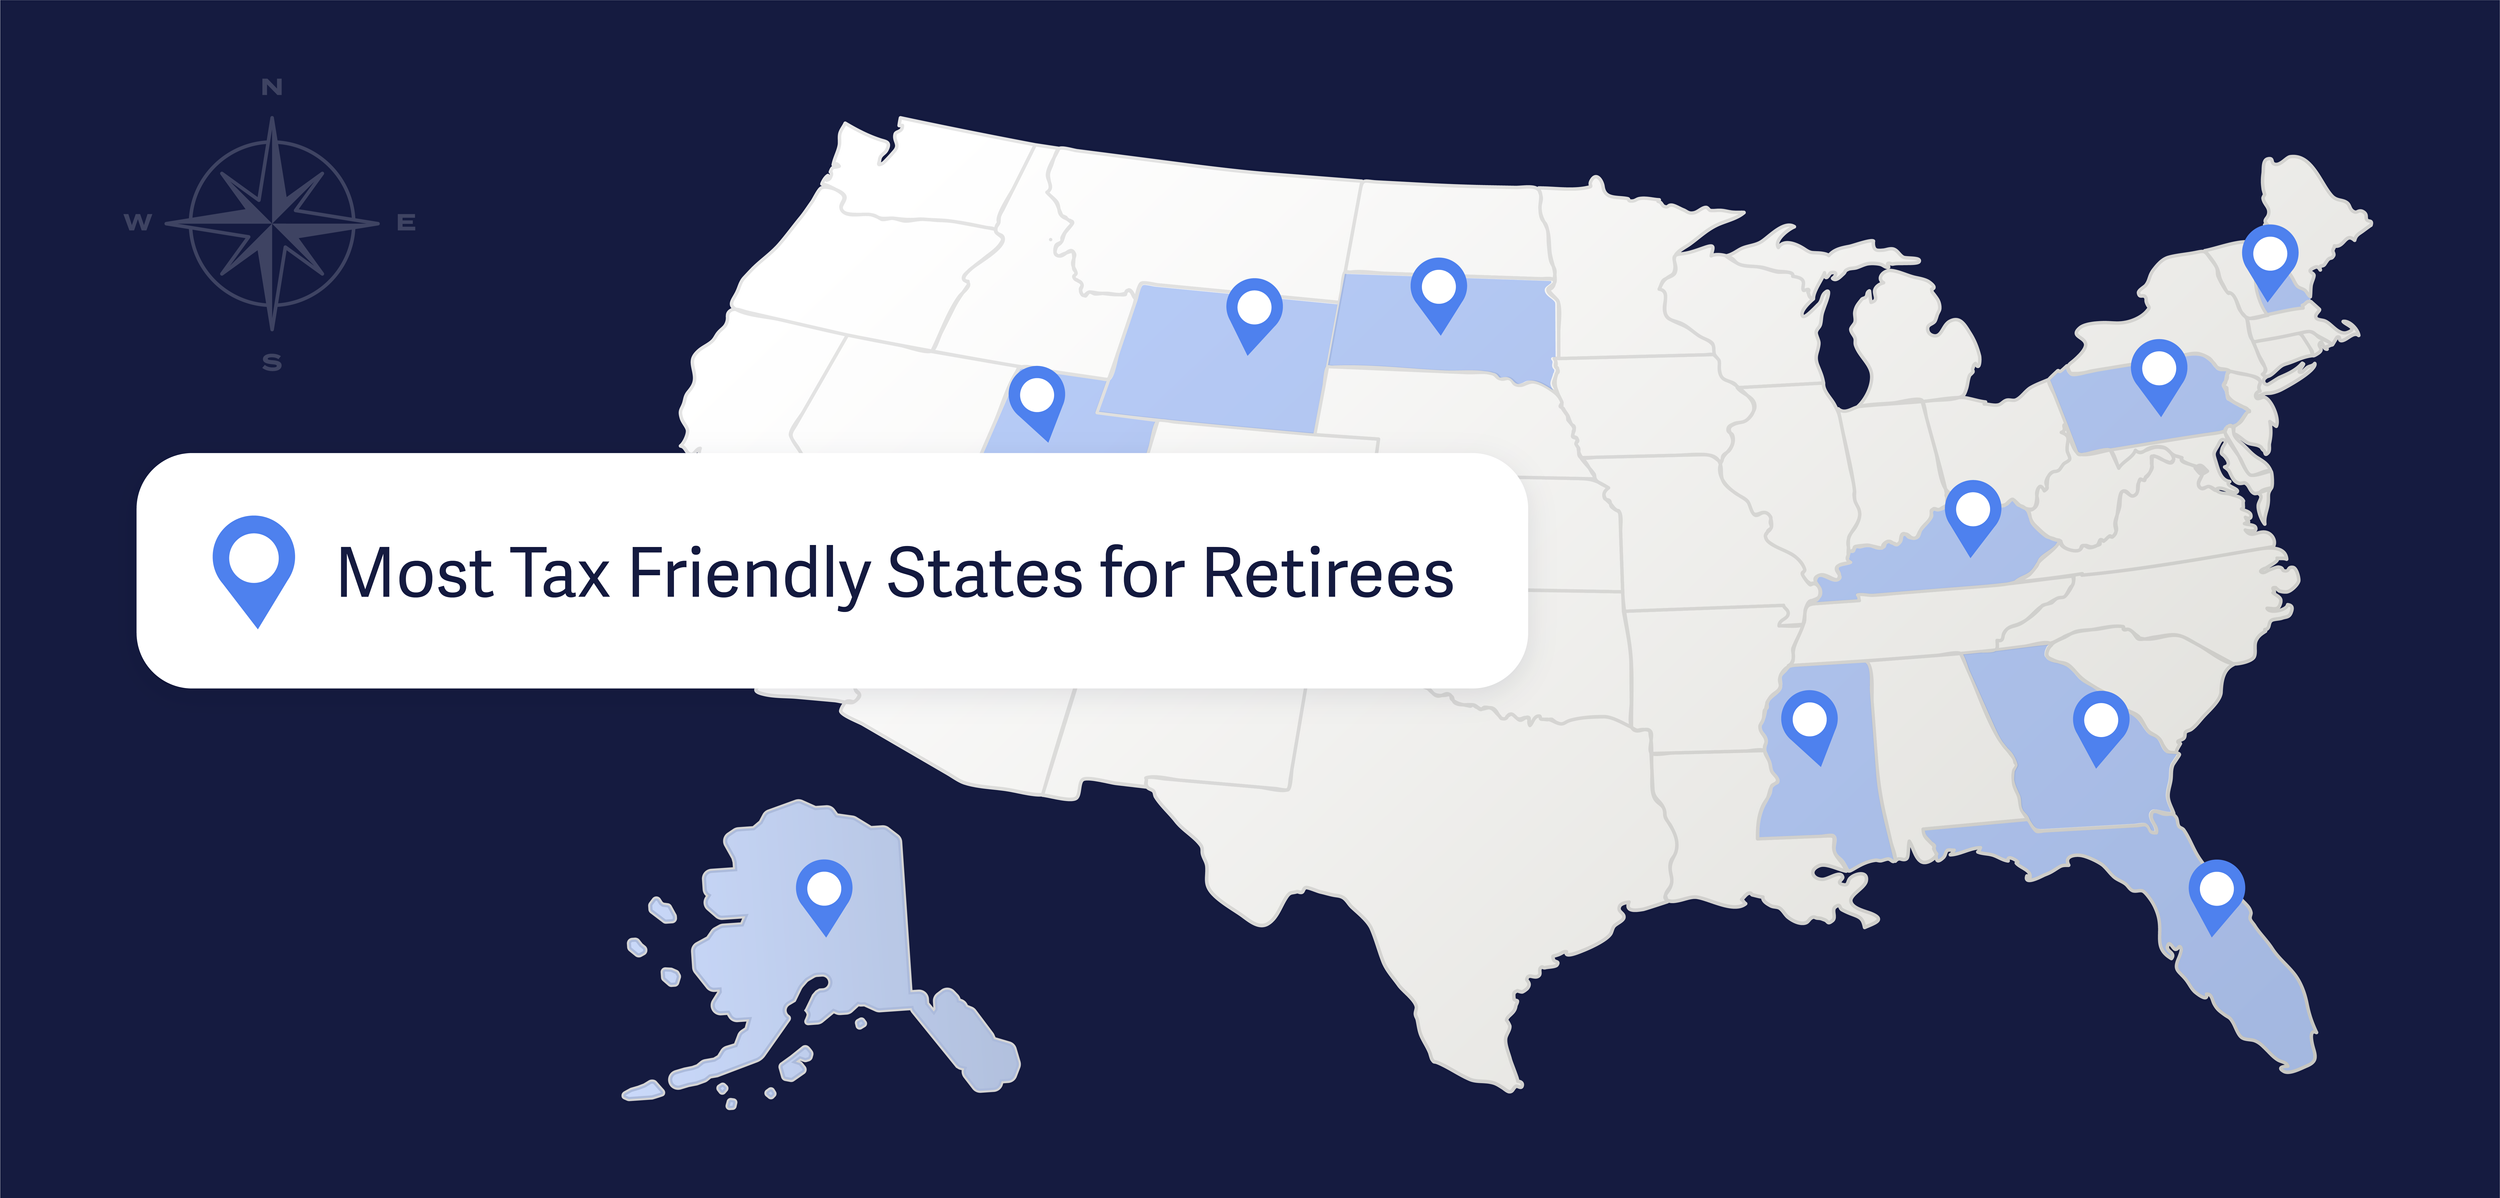 Map of the United States with marked locations, labeled as "Most Tax Friendly States for Retirees," indicating a focus on regions that offer favorable tax conditions for retired individuals.